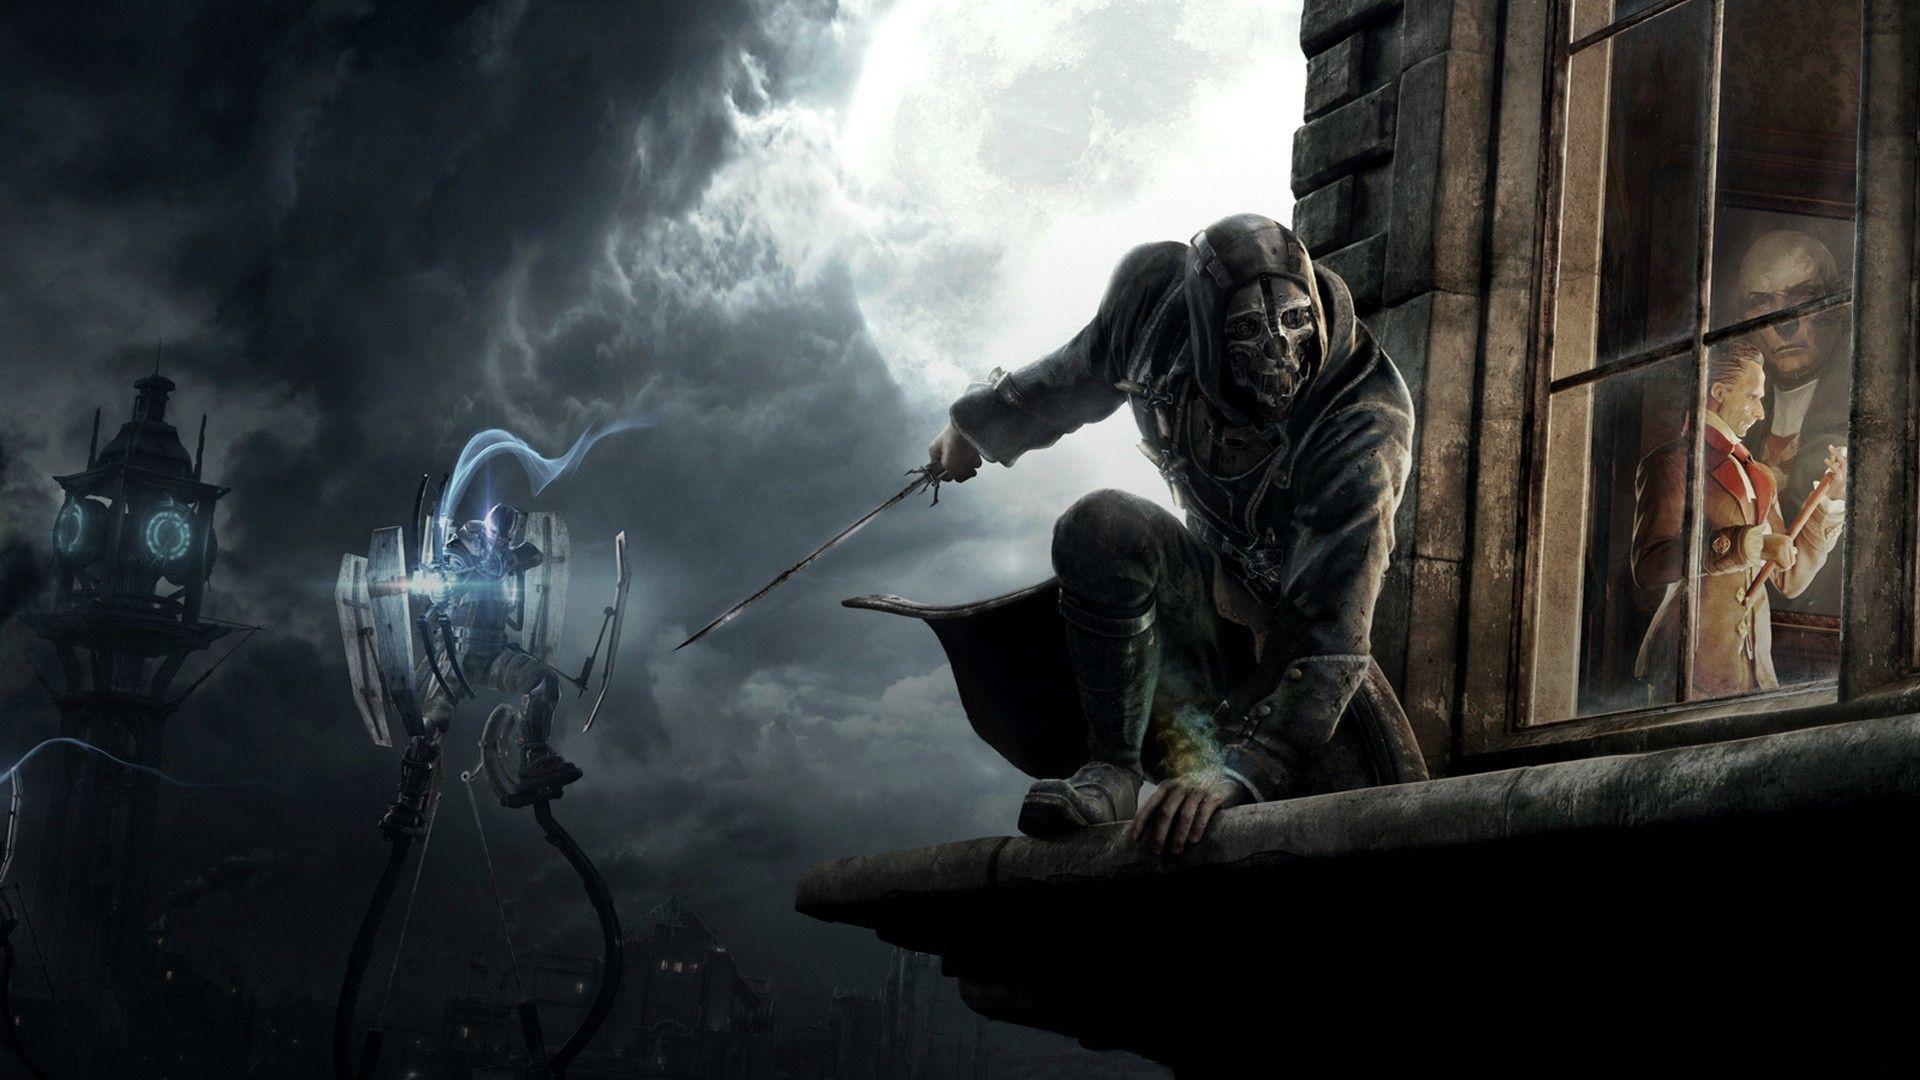 Dishonored Image, Wallpaper and Picture